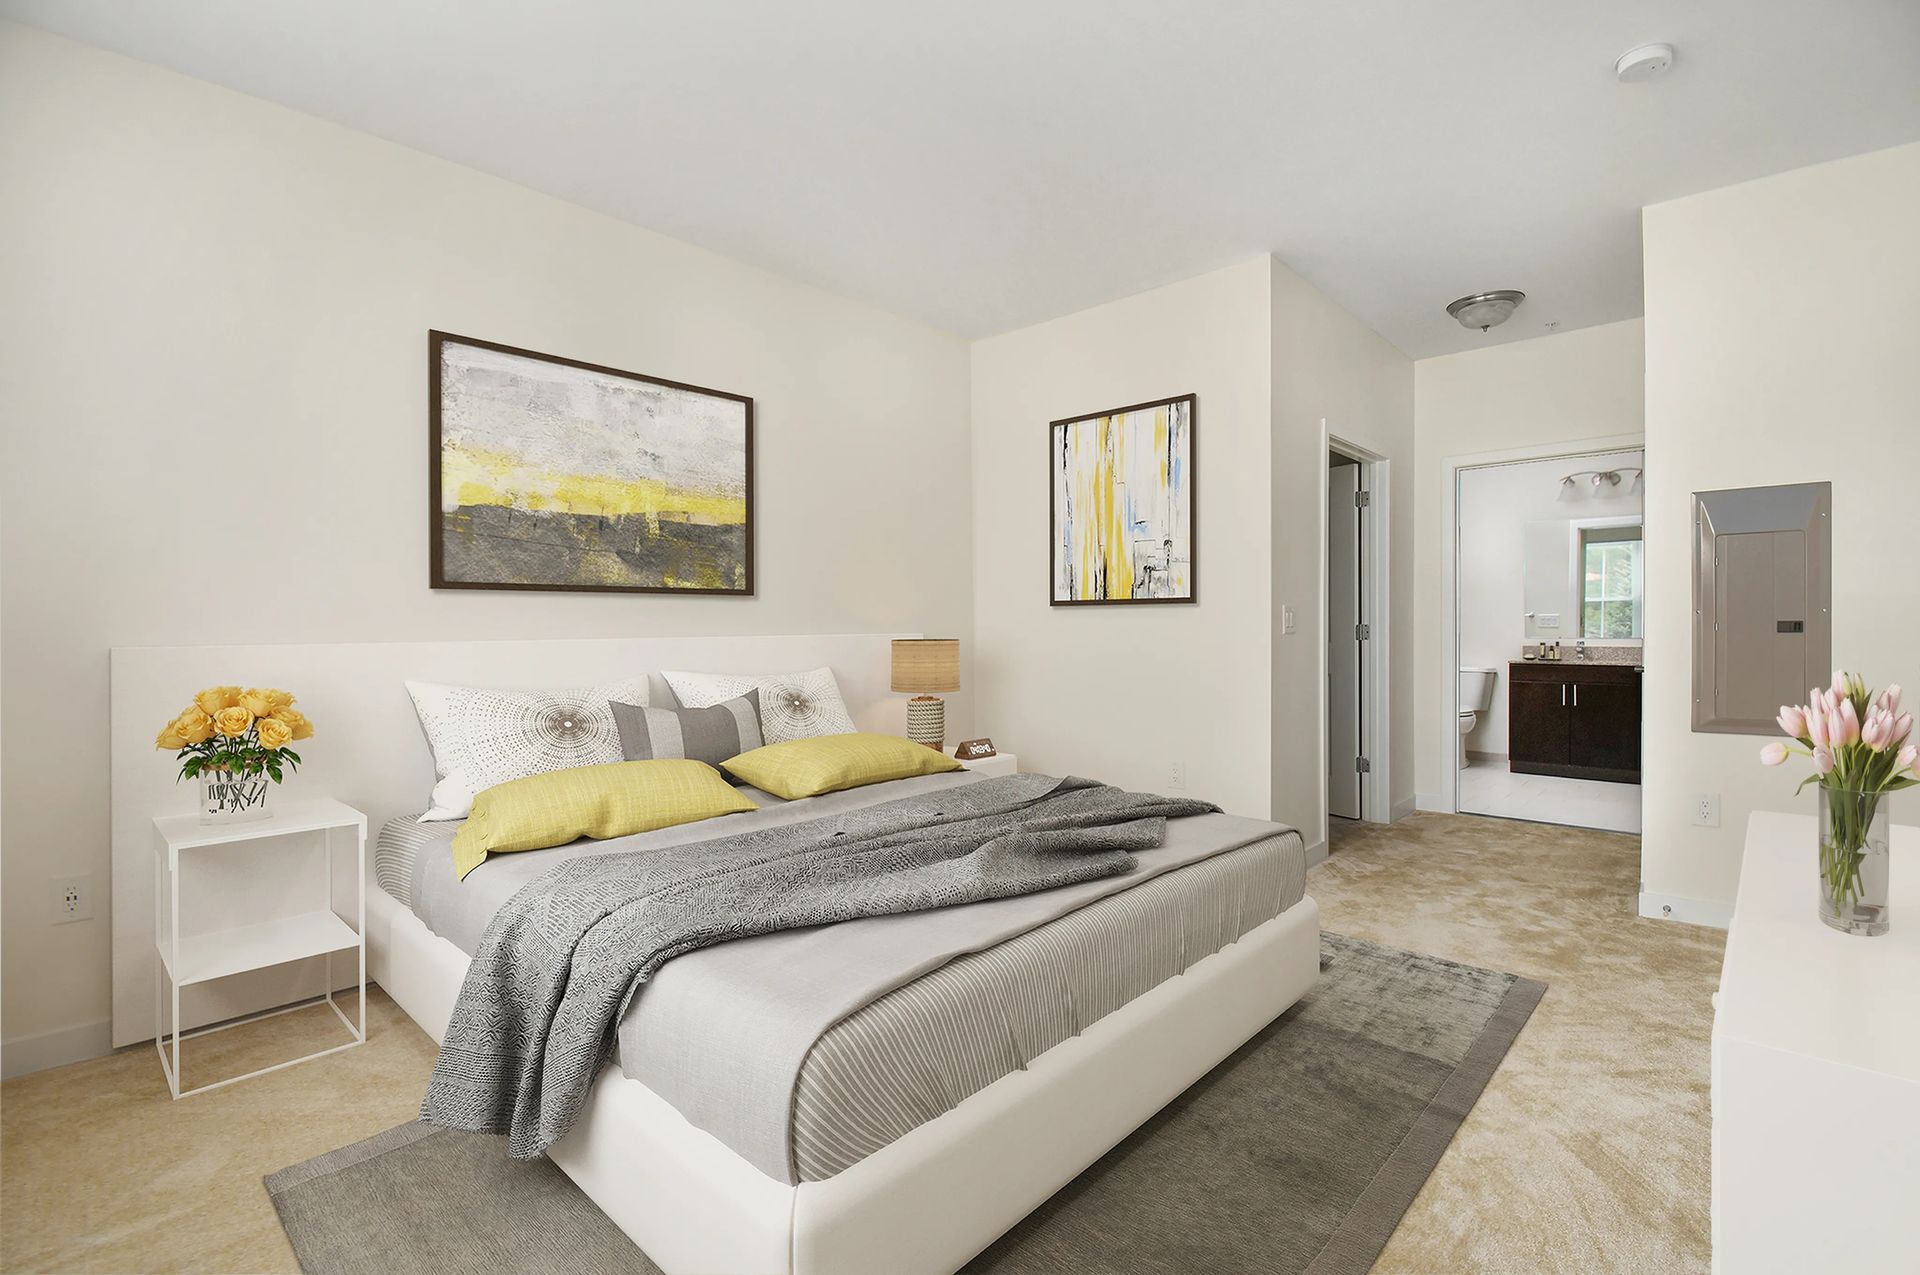 Spacious bedroom at The Residences At Great Pond.